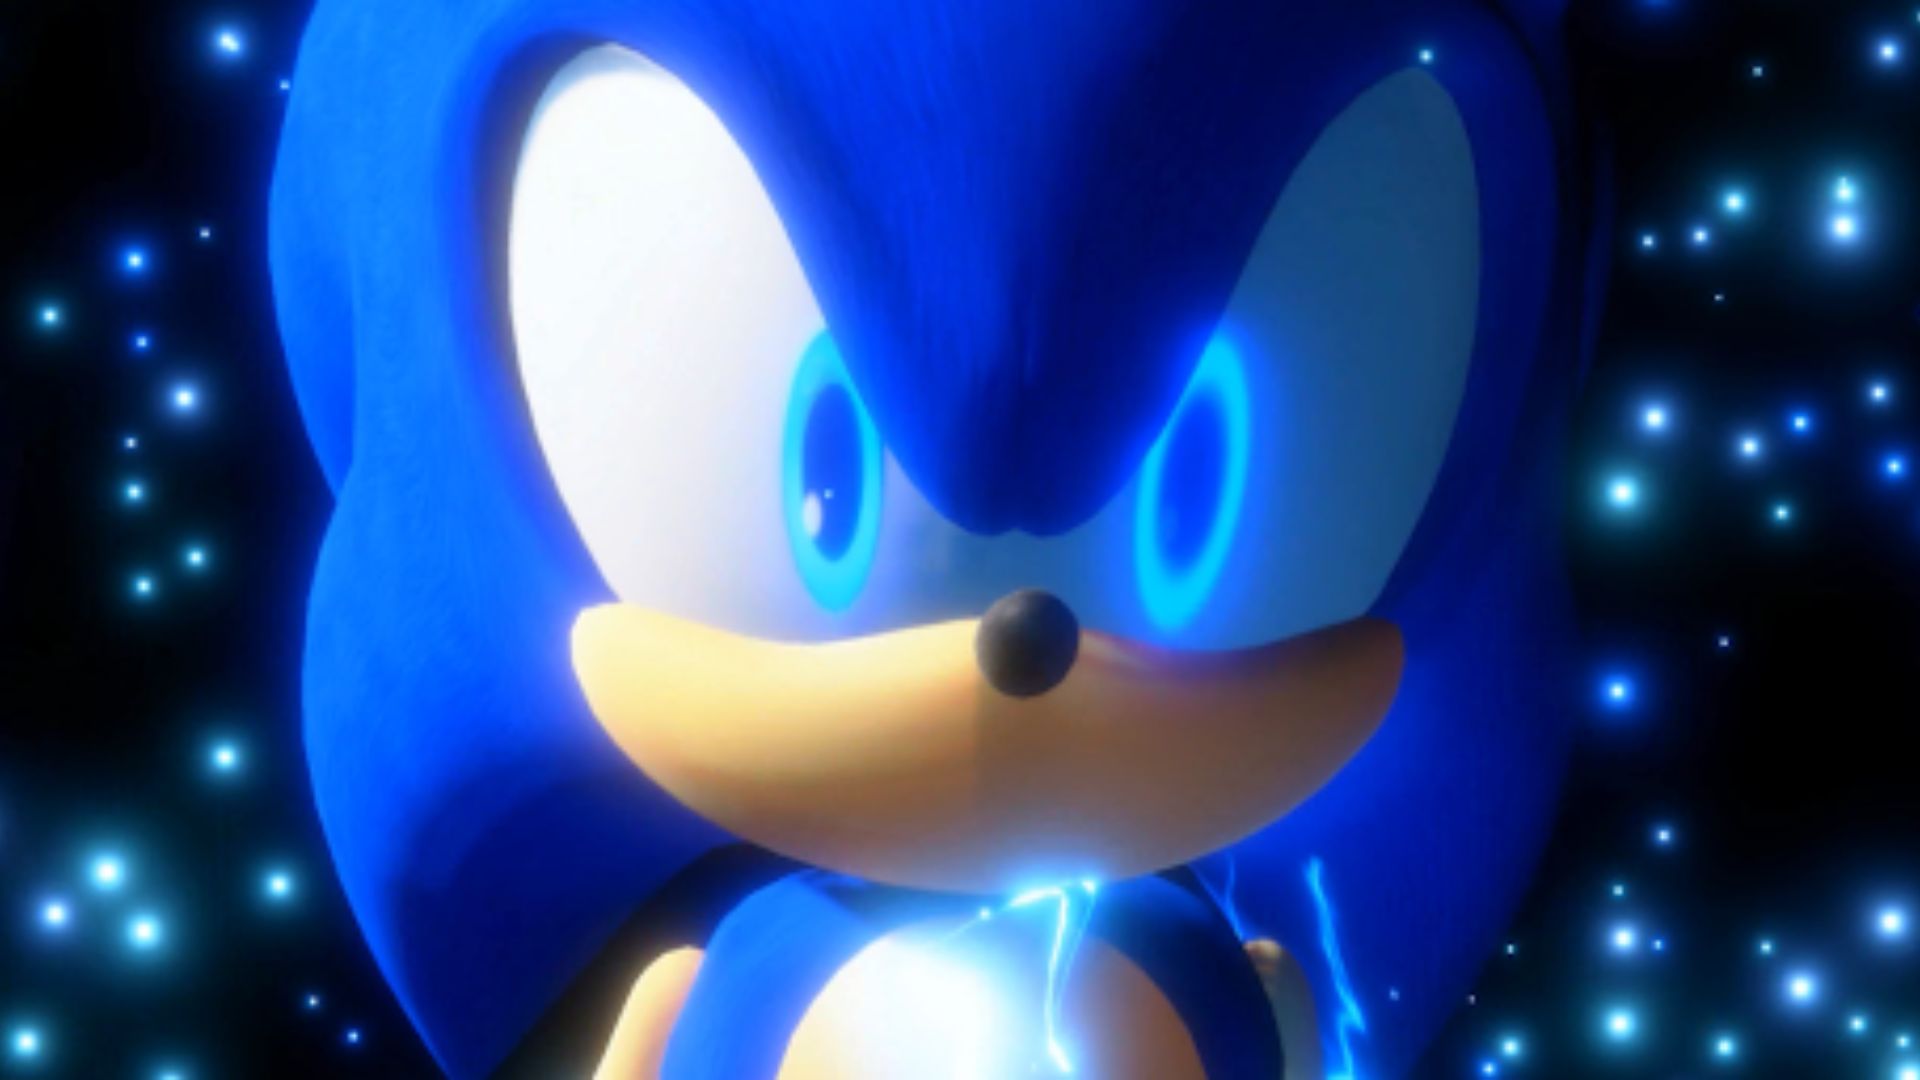 Screenshot of Sonic the Hedgehog with glowing blue eyes